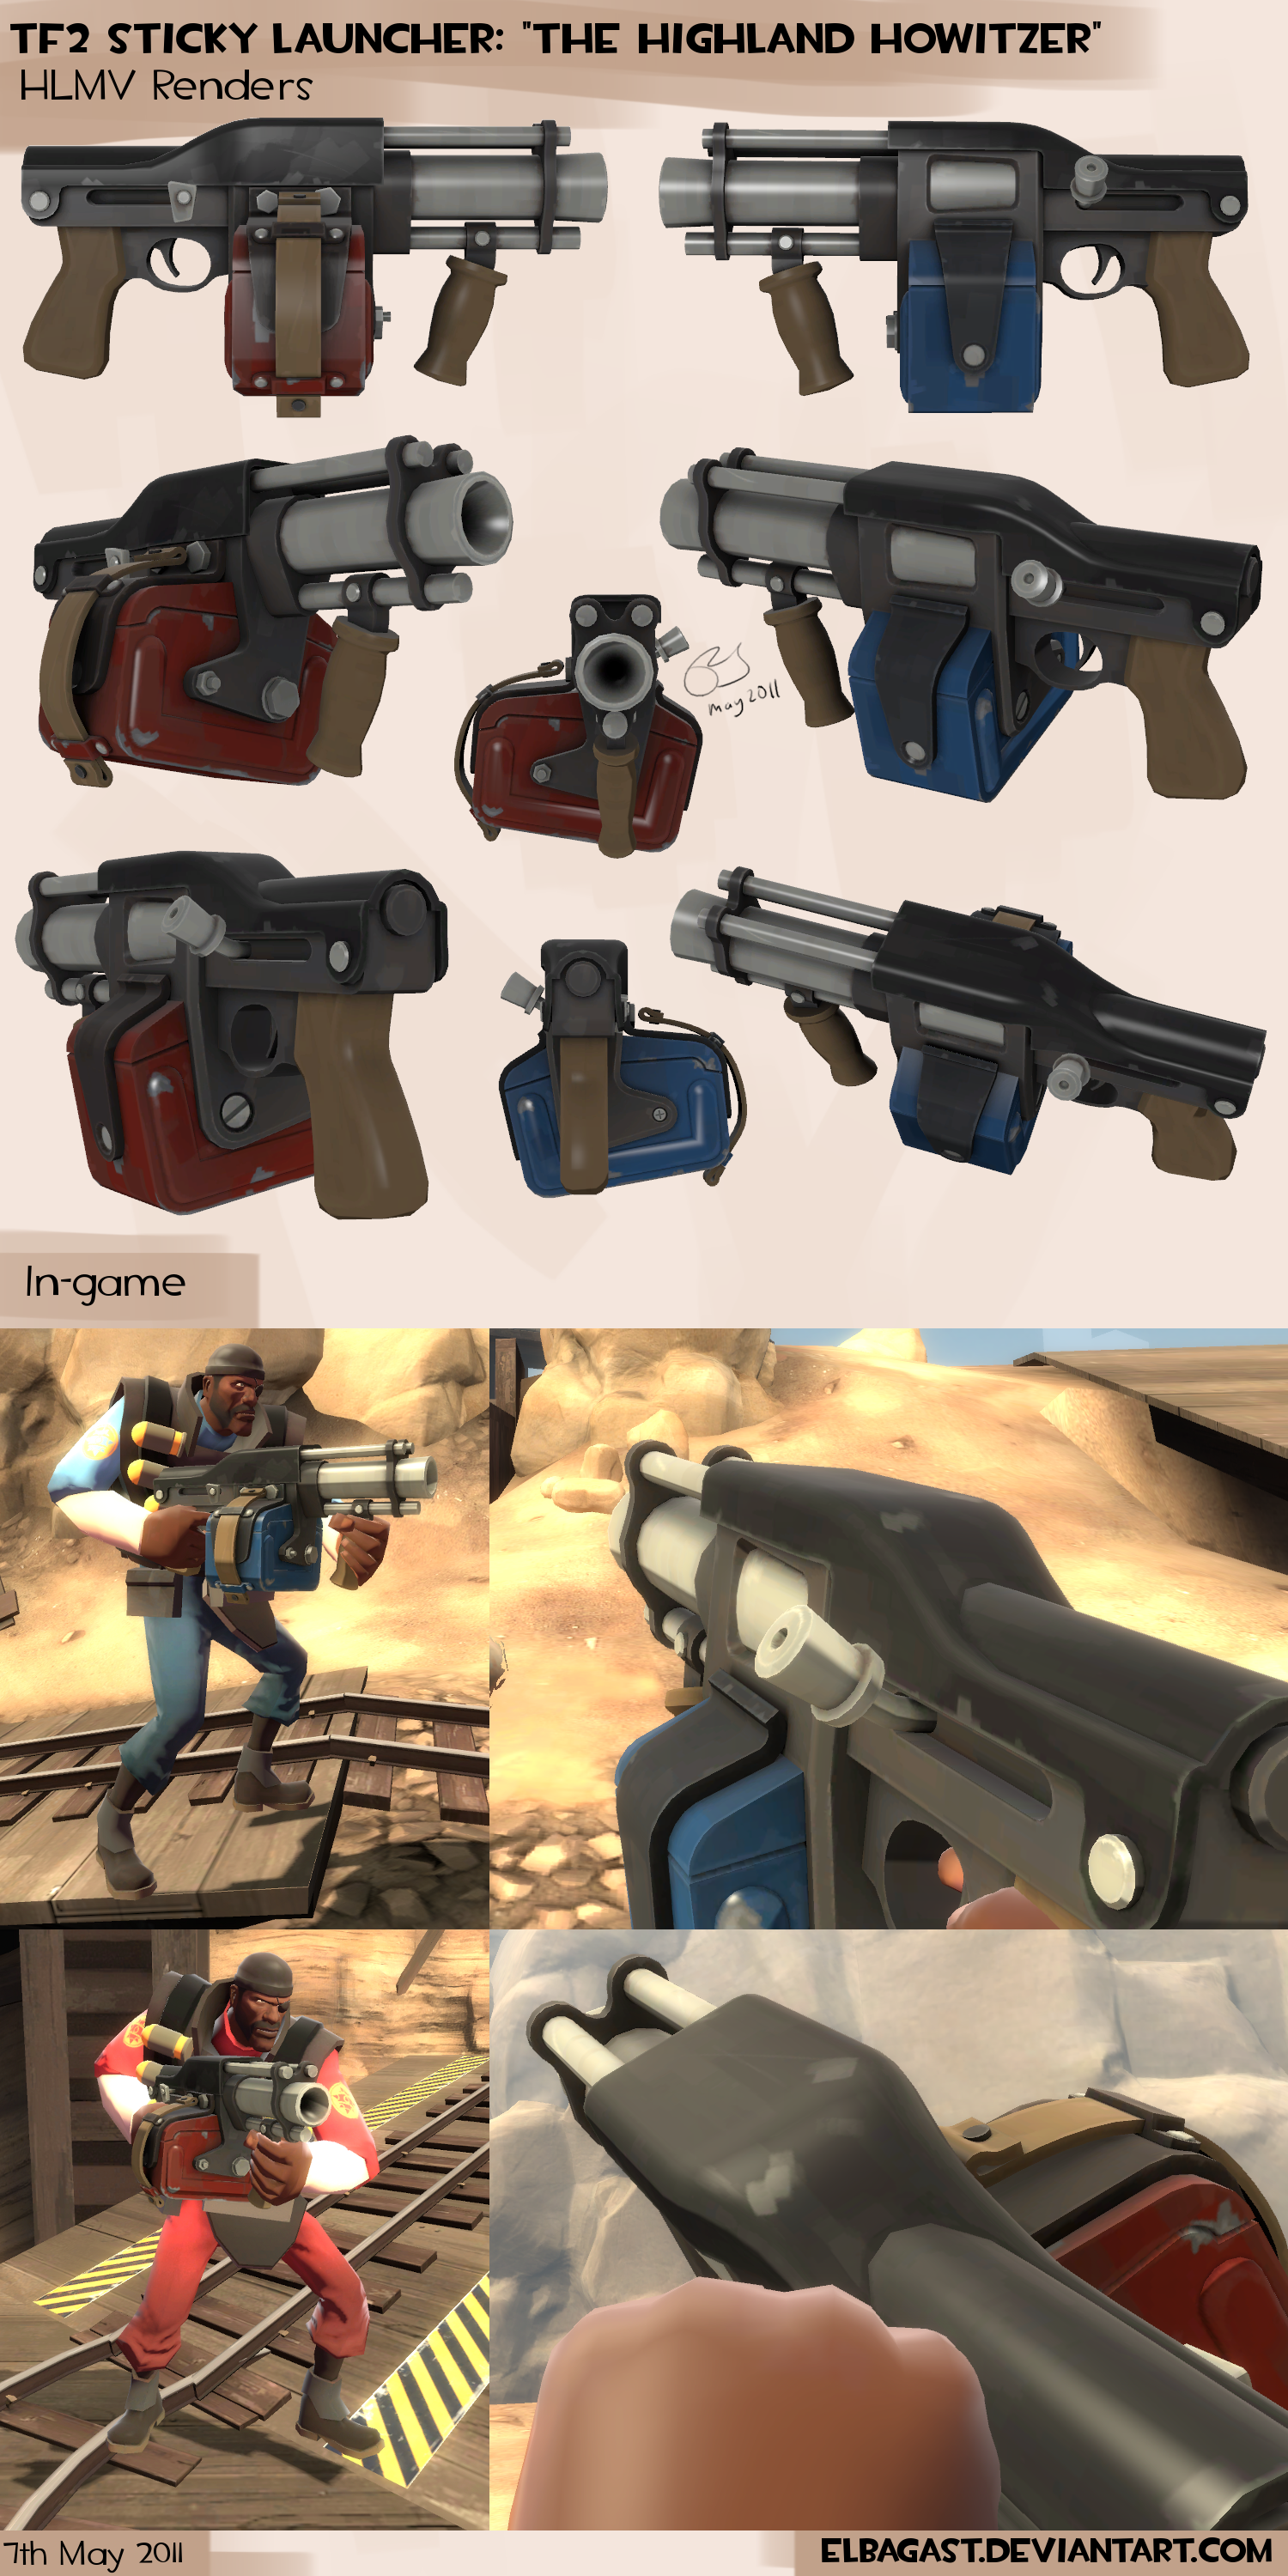 tf2_the_highland_howitzer_by_elbagast-d3ftbbf.png